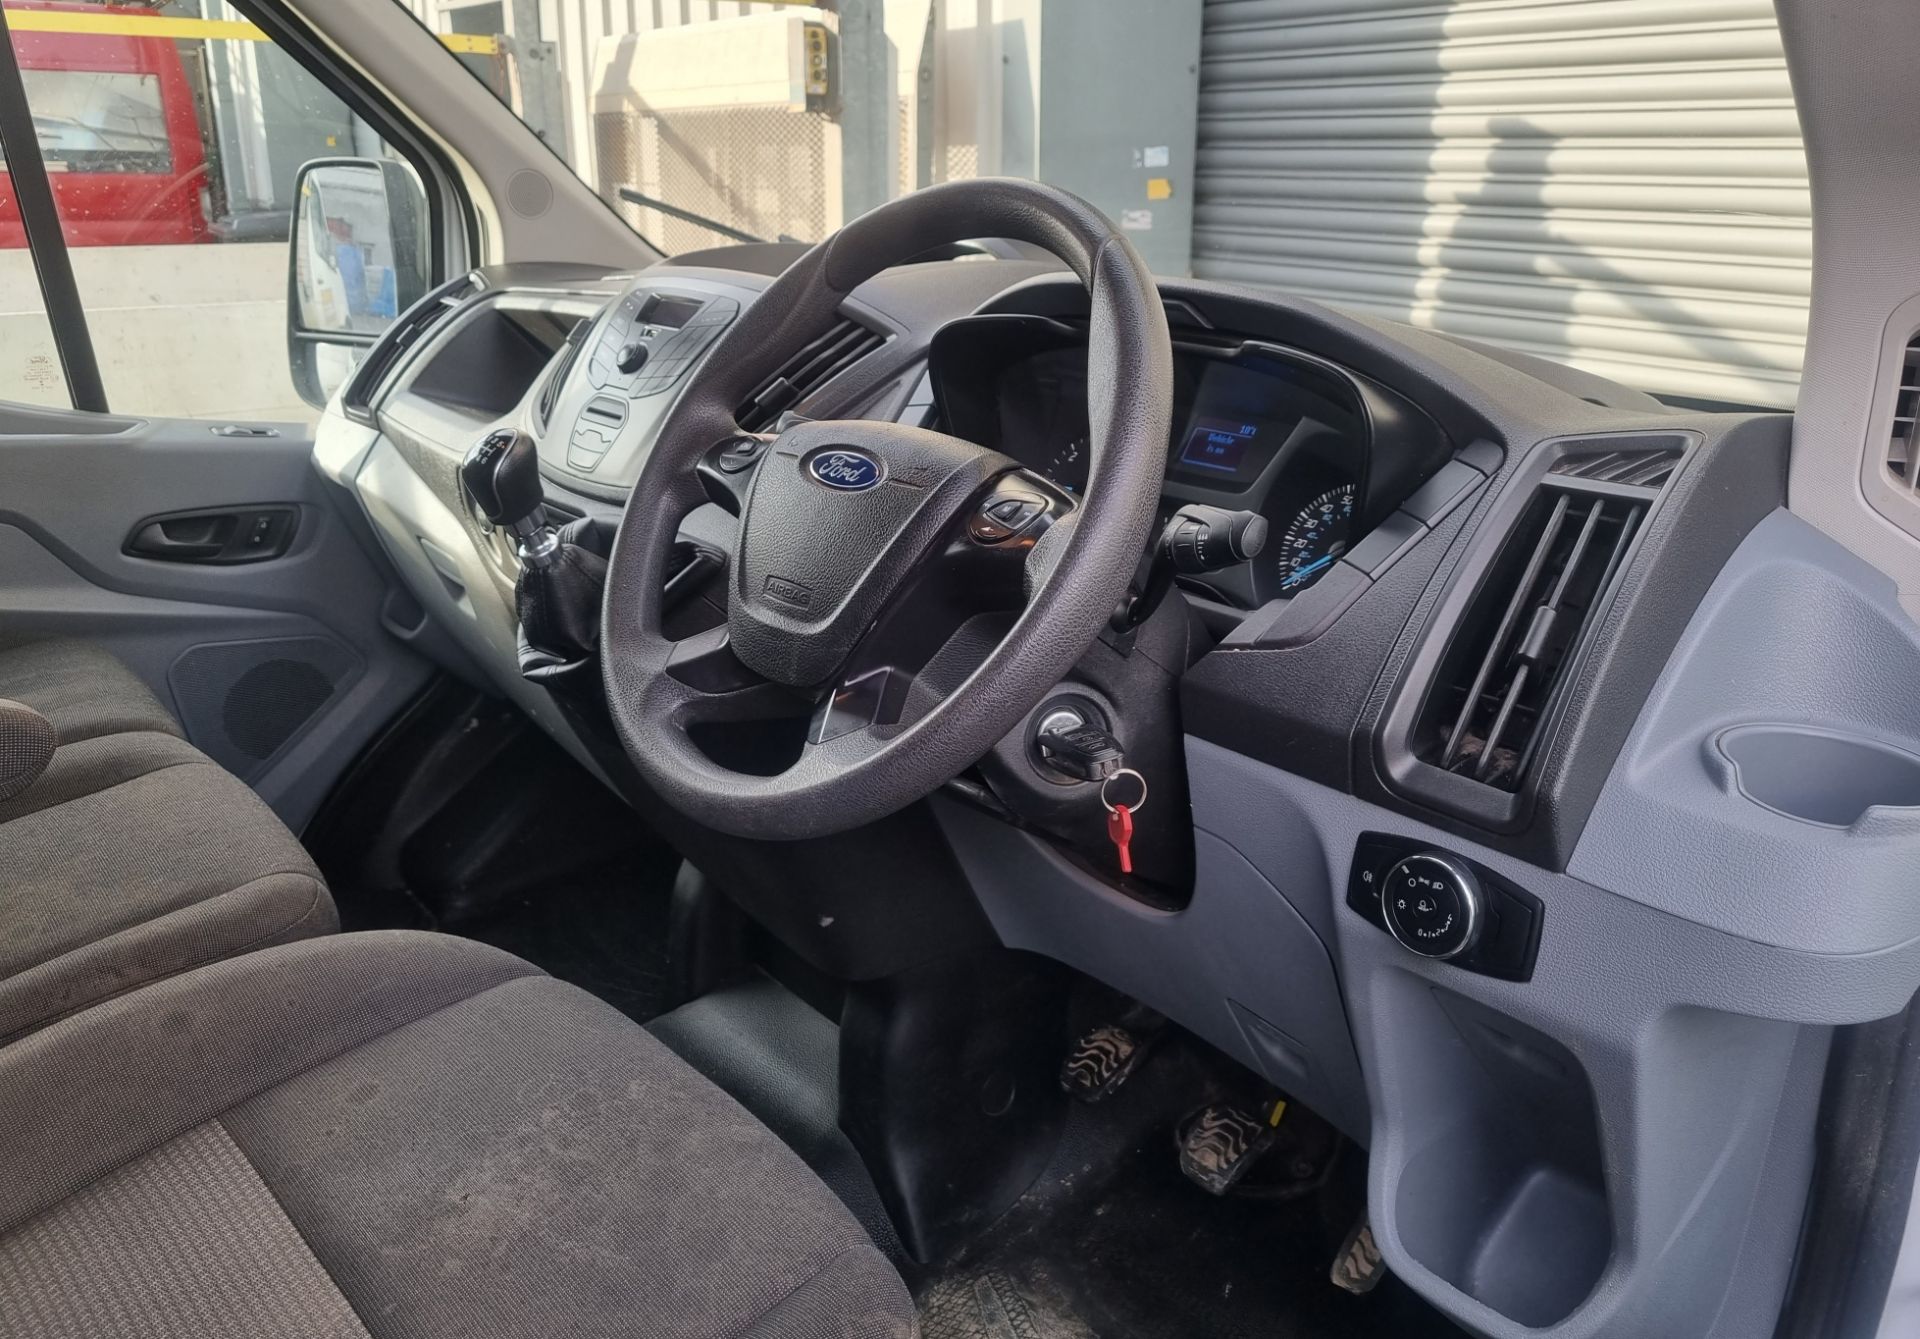 2019 FORD TRANSIT PANEL VAN - 99,507 MILES - SERVICED REGULARLY - READY FOR WORK - Image 5 of 8